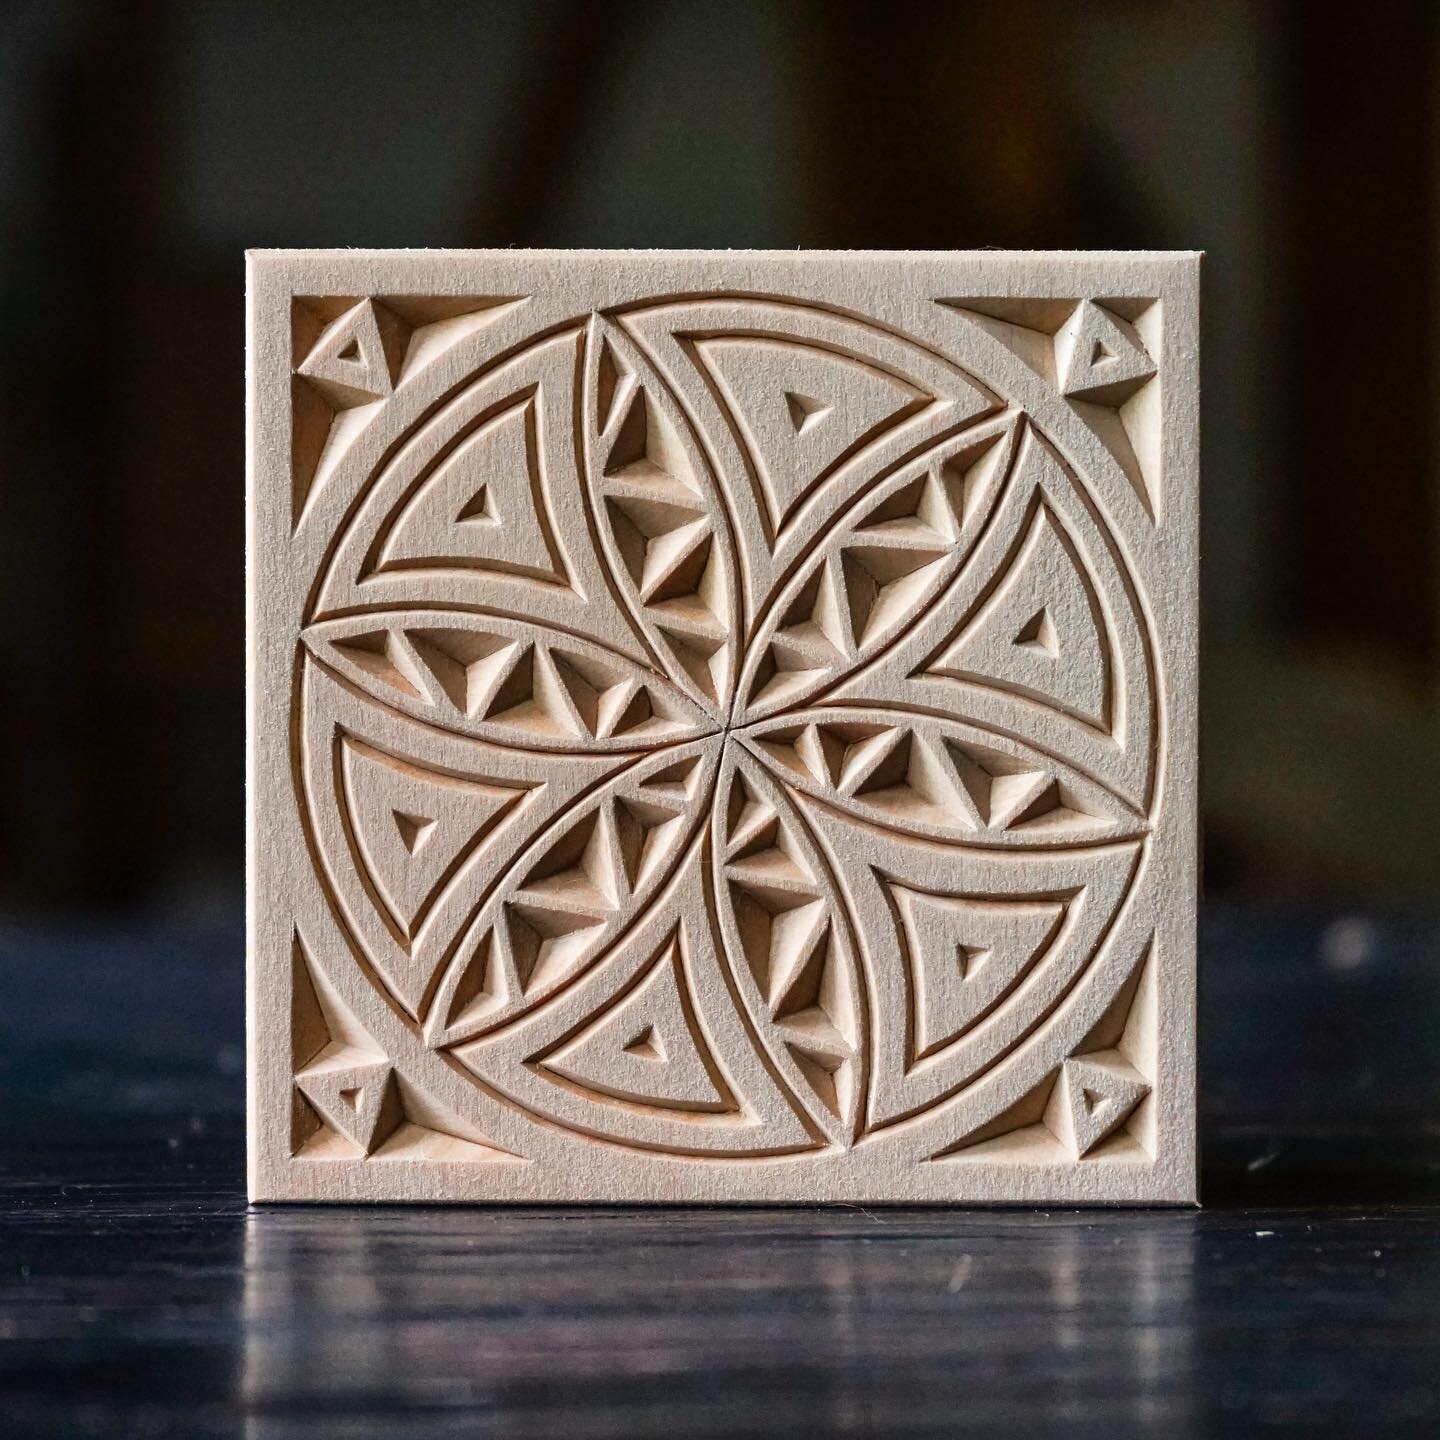 Another small tile for finish testing.
​
​#woodcarving #chipcarving
​